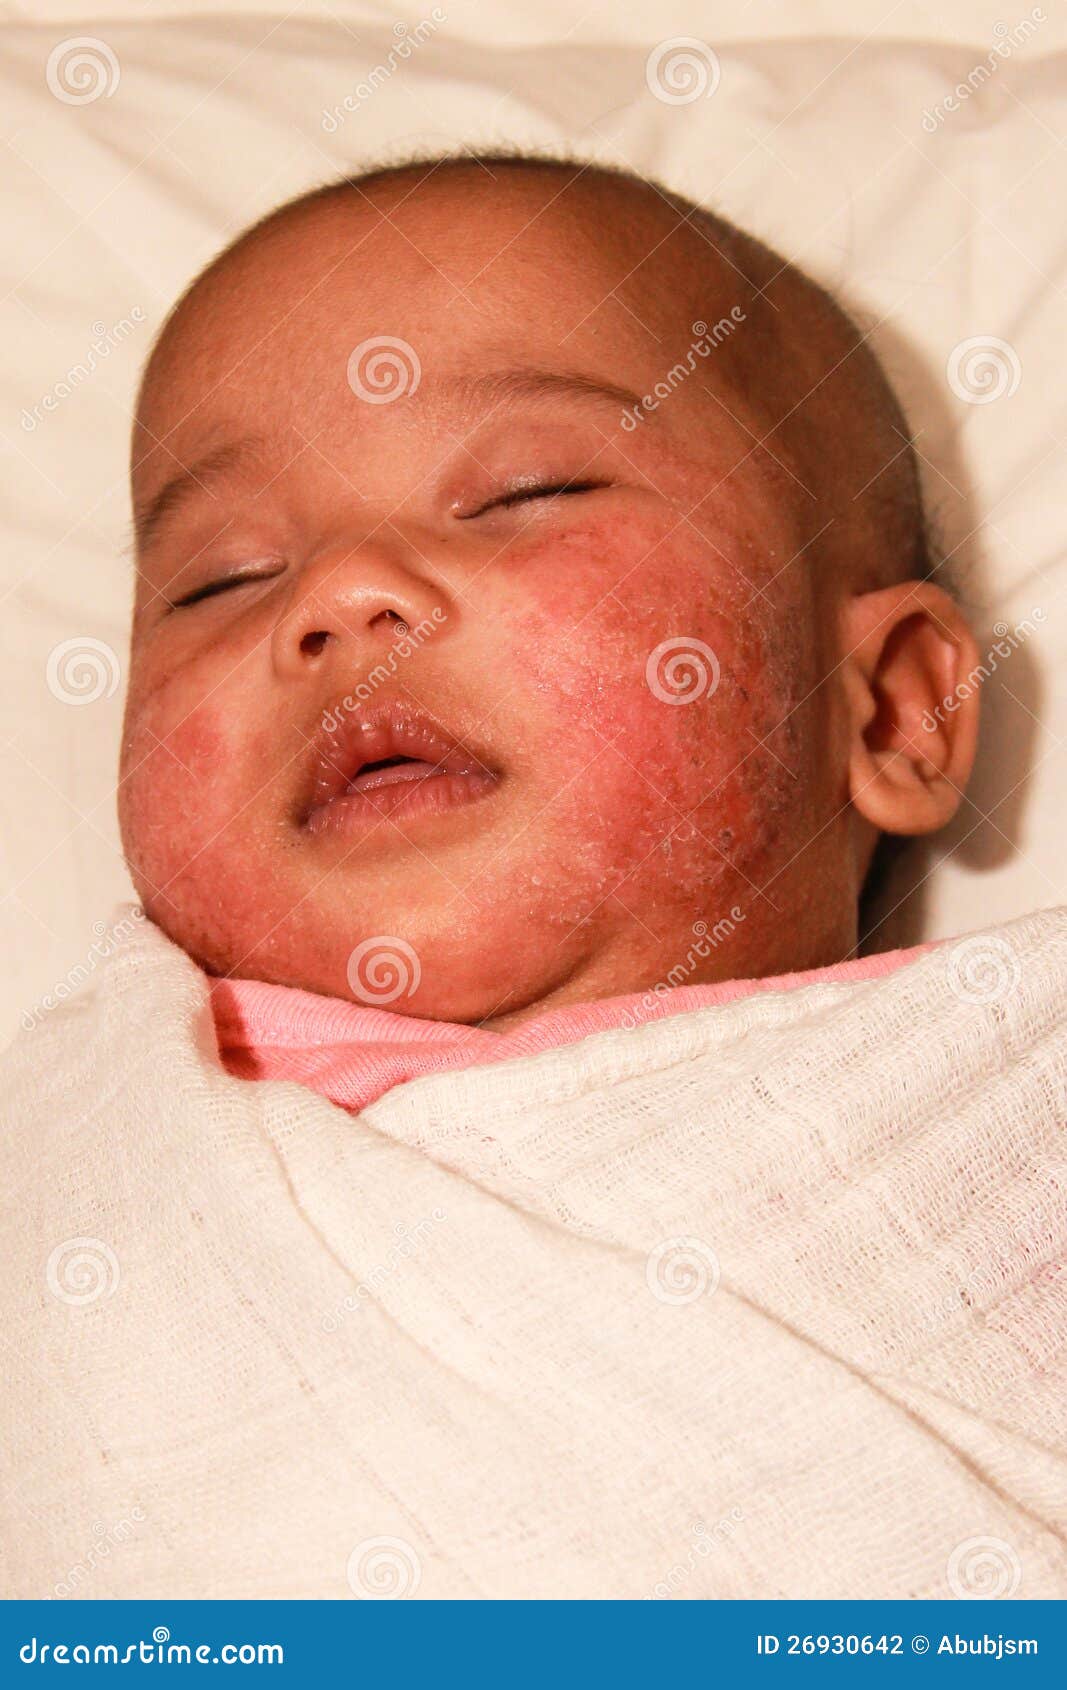 baby with atopic dermatitis